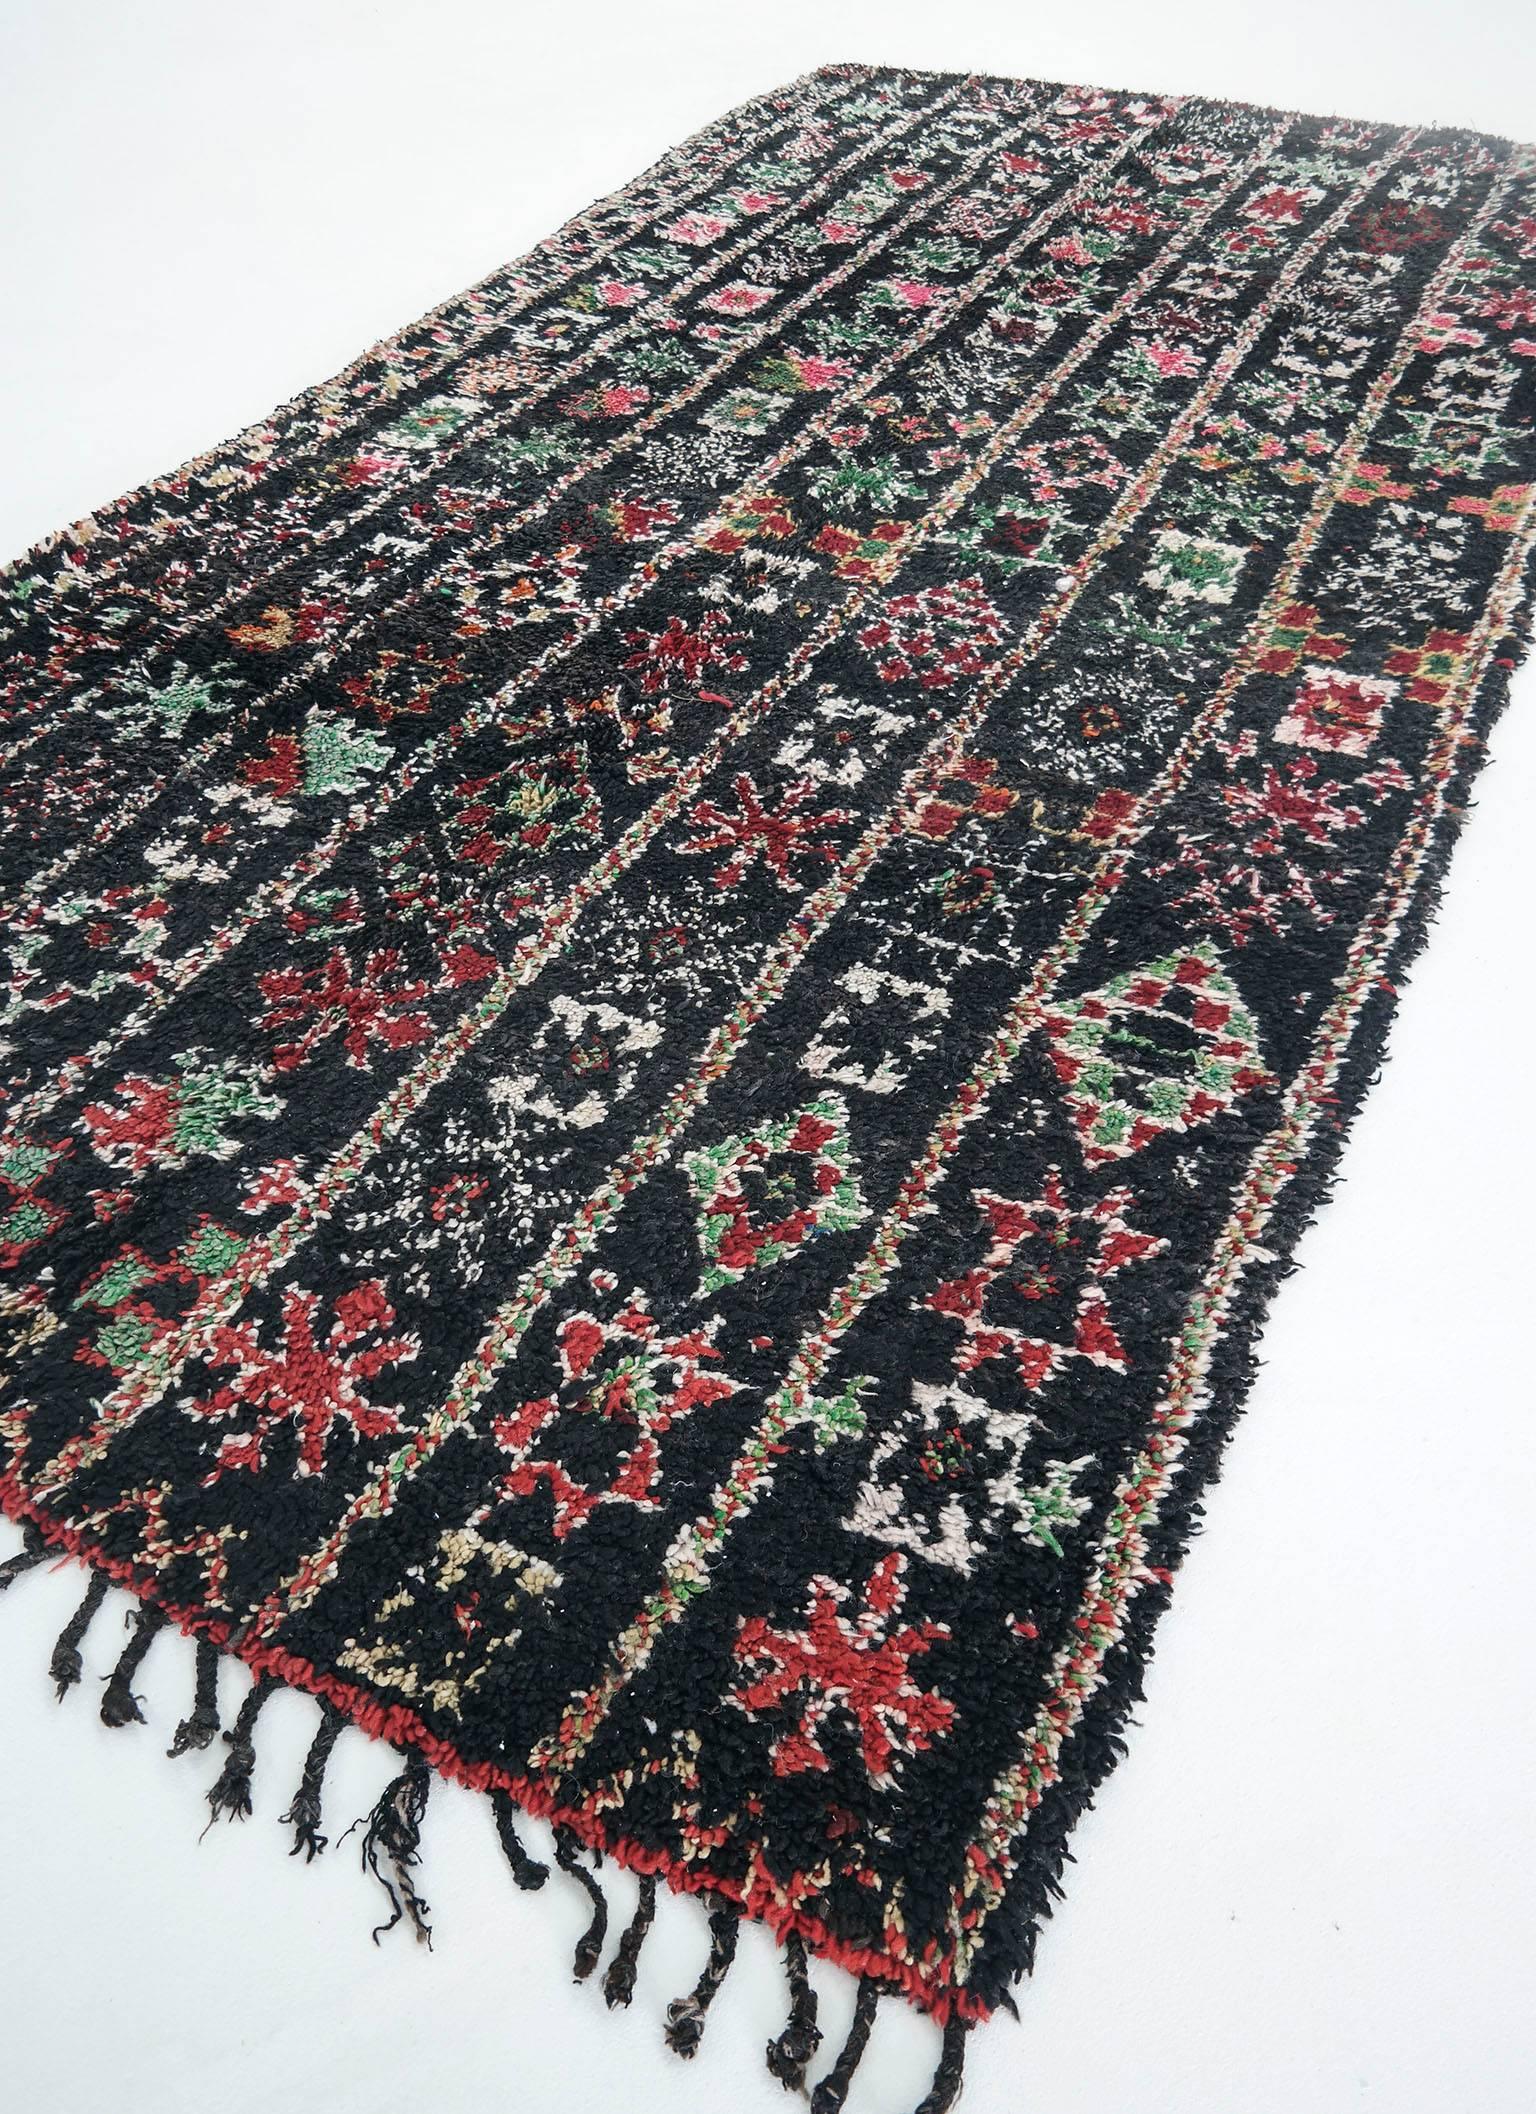 Vintage Moroccan rug

A beautiful Beni MGuild rug in beautiful mysterious colors. The colors are natural dye, the original coloration. Shades of black, green, ruby red, warm orange and pink. 

The Beni M'Guild rugs are thick, deep pile rugs, made